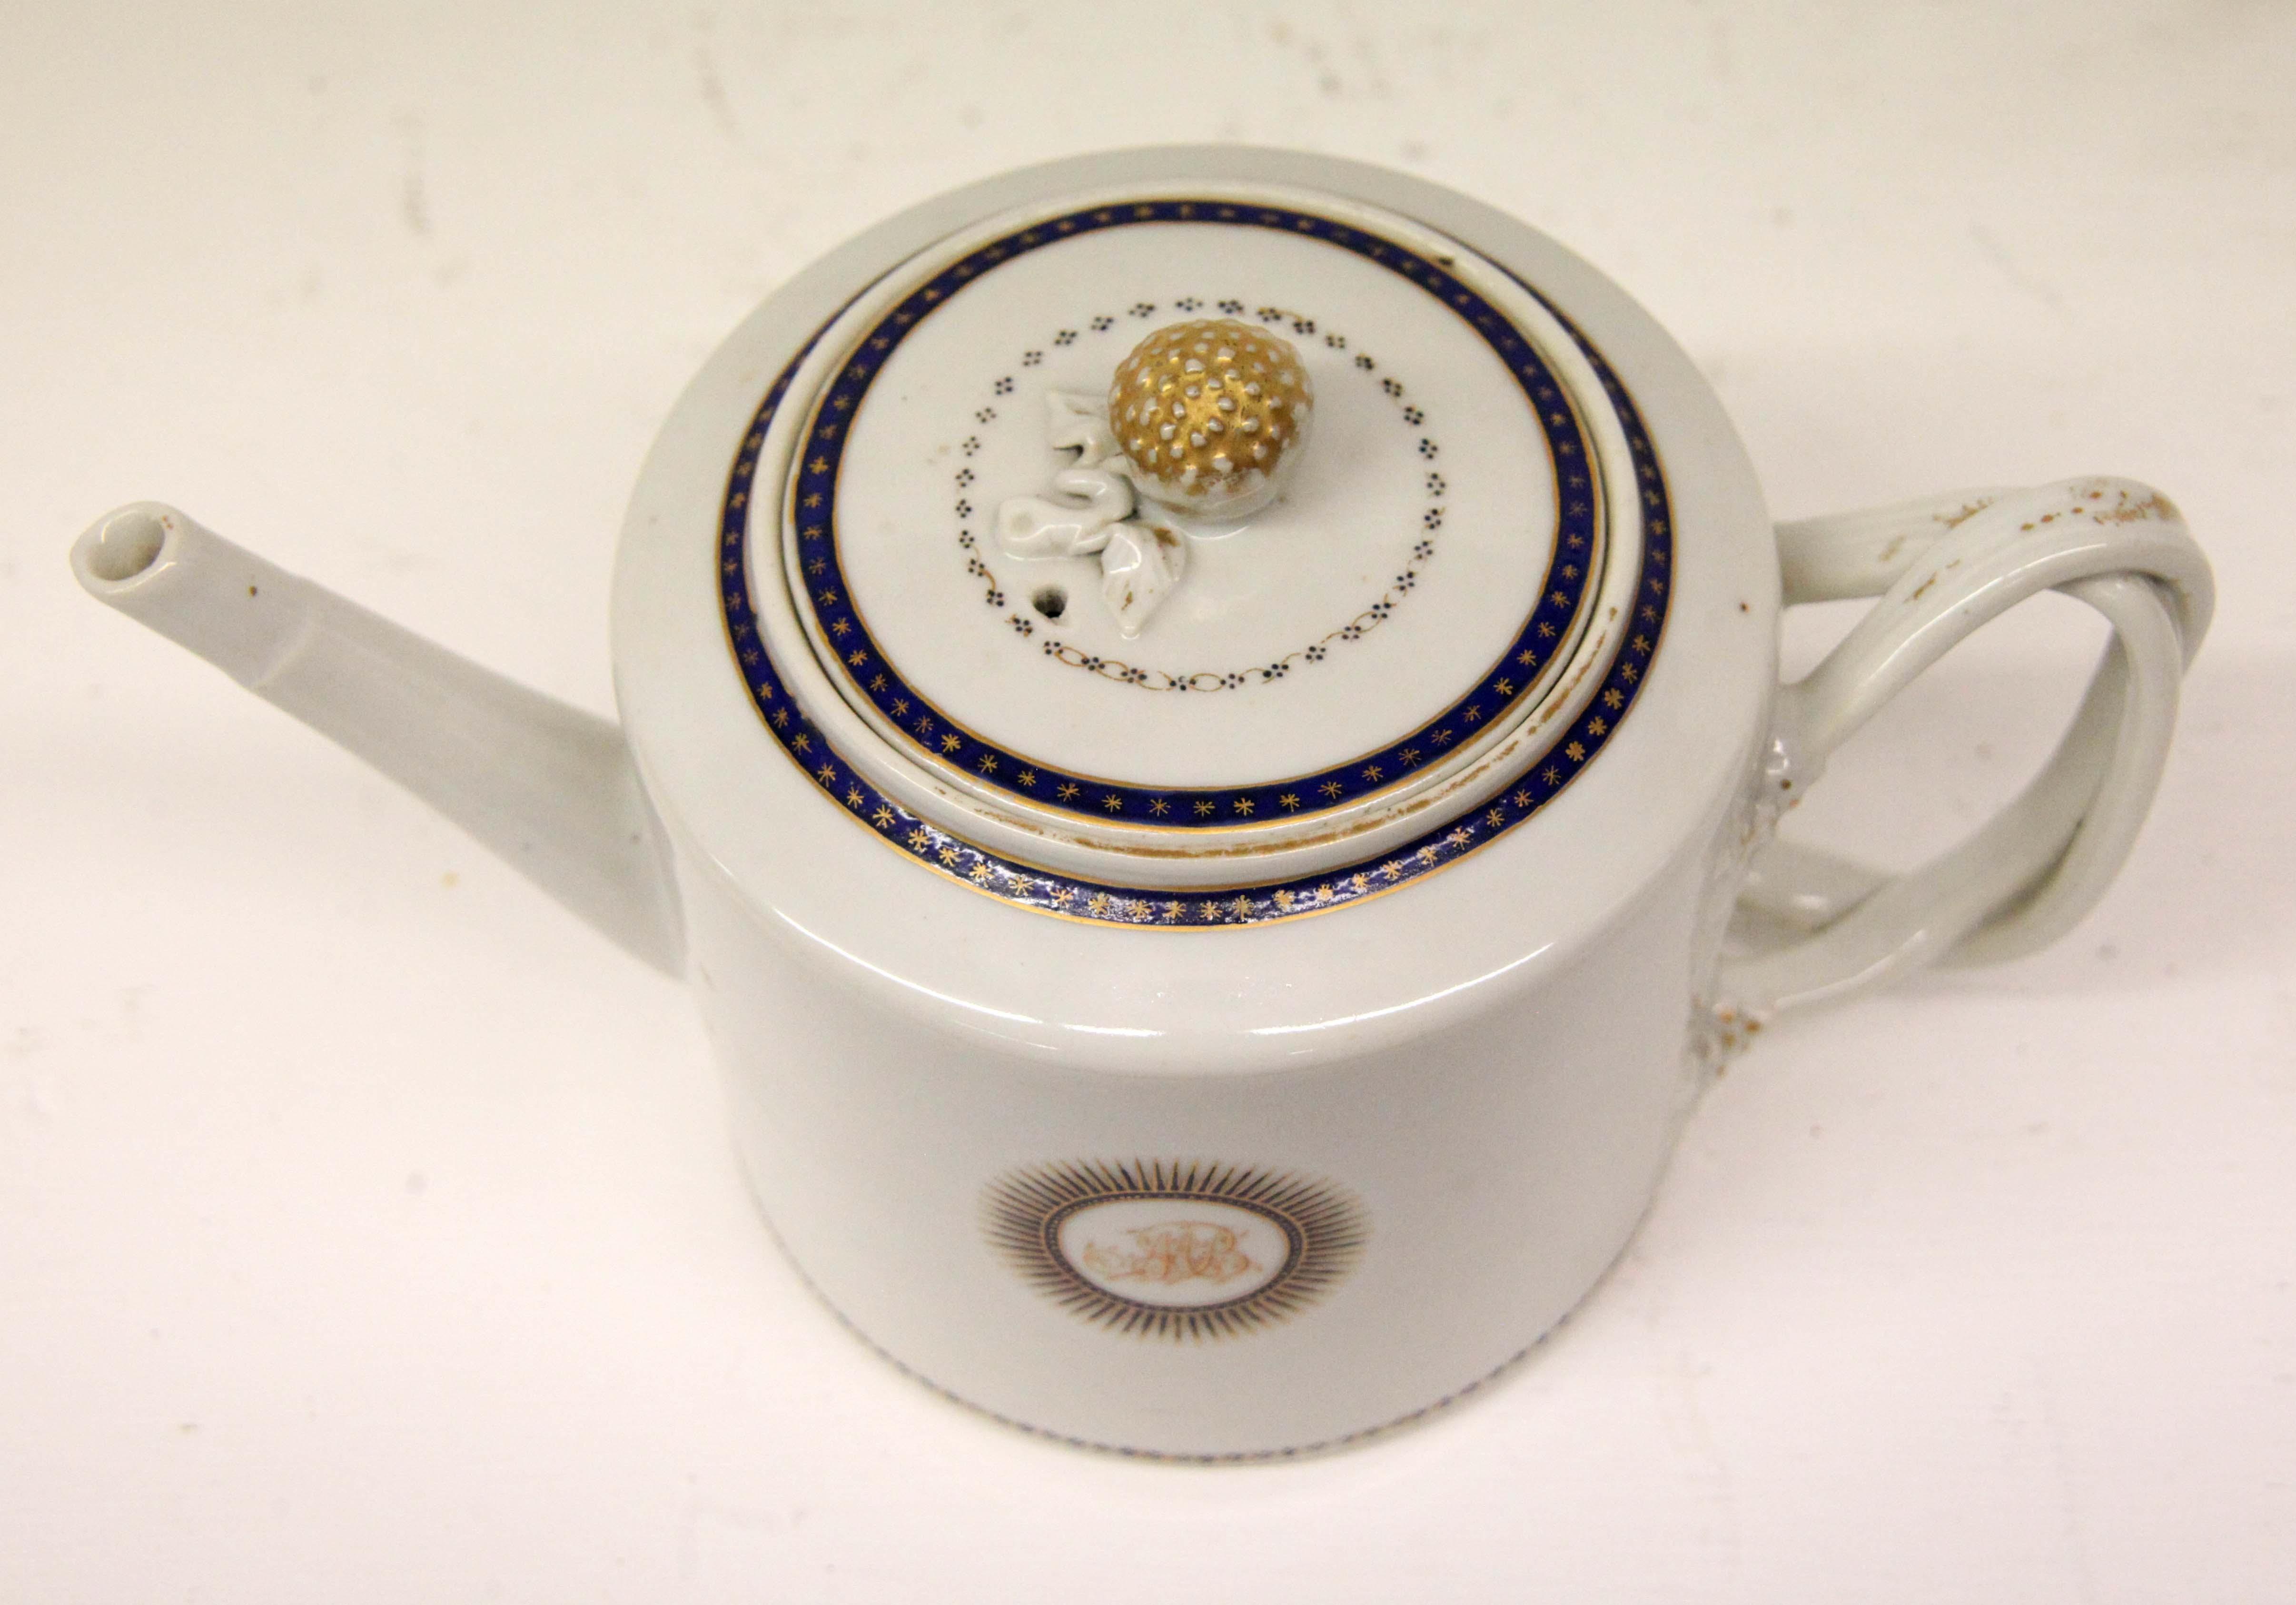 Chinese Export Blanc porcelain teapot, the lid border and teapot rim with cobalt and gilt decoration, acorn finial, teapot body with initialed stylized sunburst, basket weave handle.